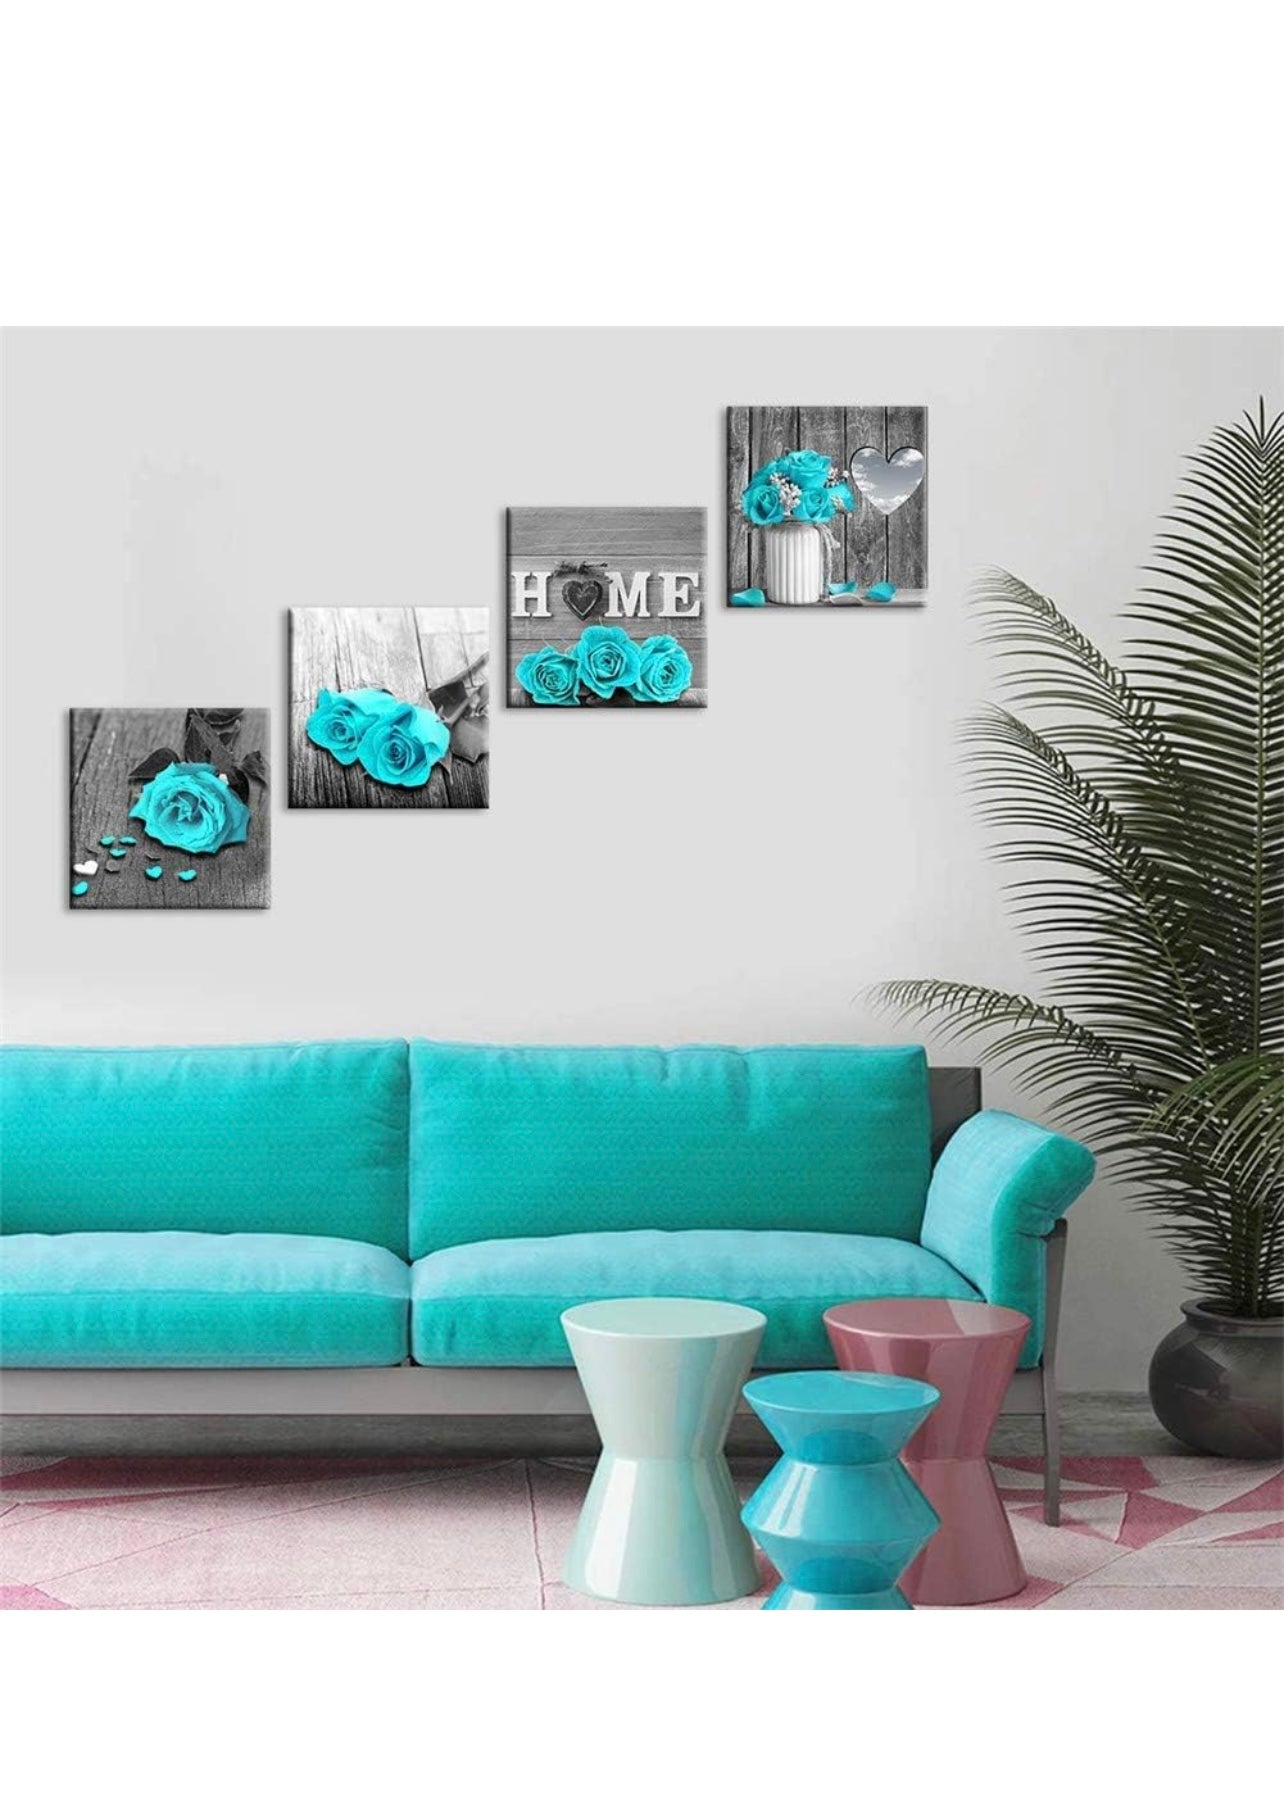 Wall Decor for Living Room Teal Blue Rose Flower Bathroom Decor Bedroom Wall Decor Black and White Canvas Art Home Love Couple Women Gifts Theme Modern Frame Pictures Turquoise Rustic Sets 14 inch